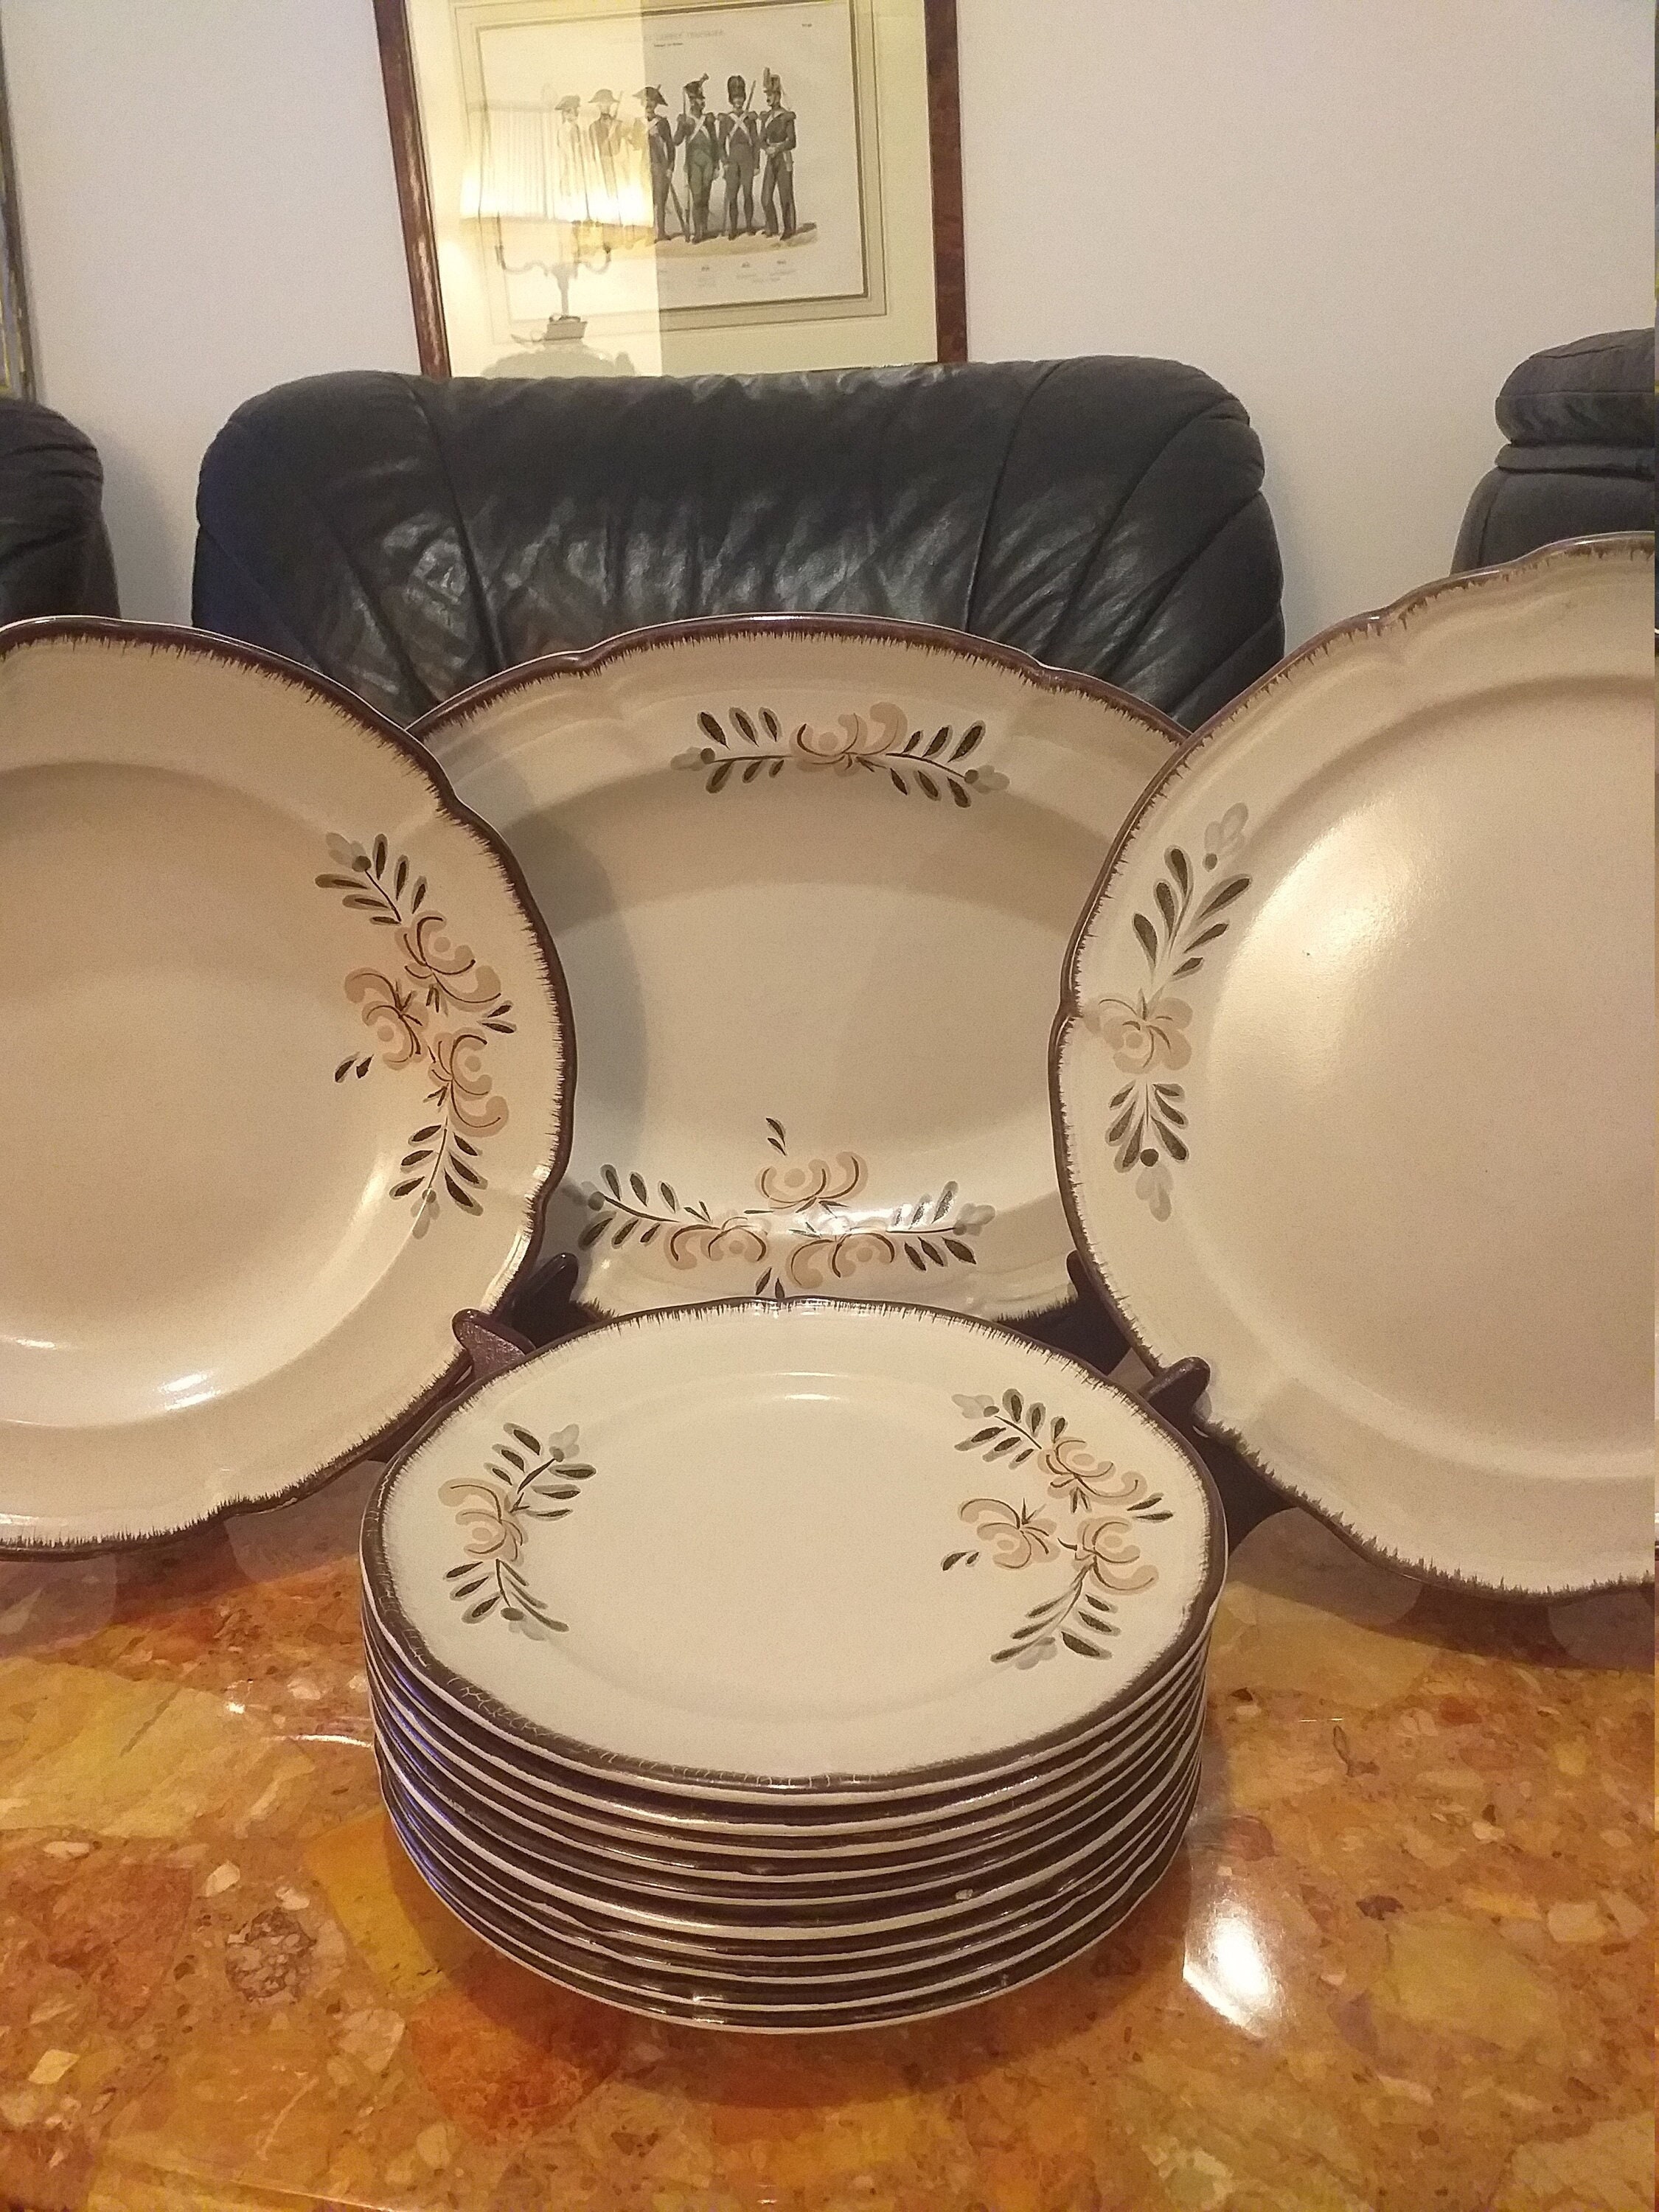 Vintage Plates Niderviller France The Are in Very Good Condition Visually They Just Like New